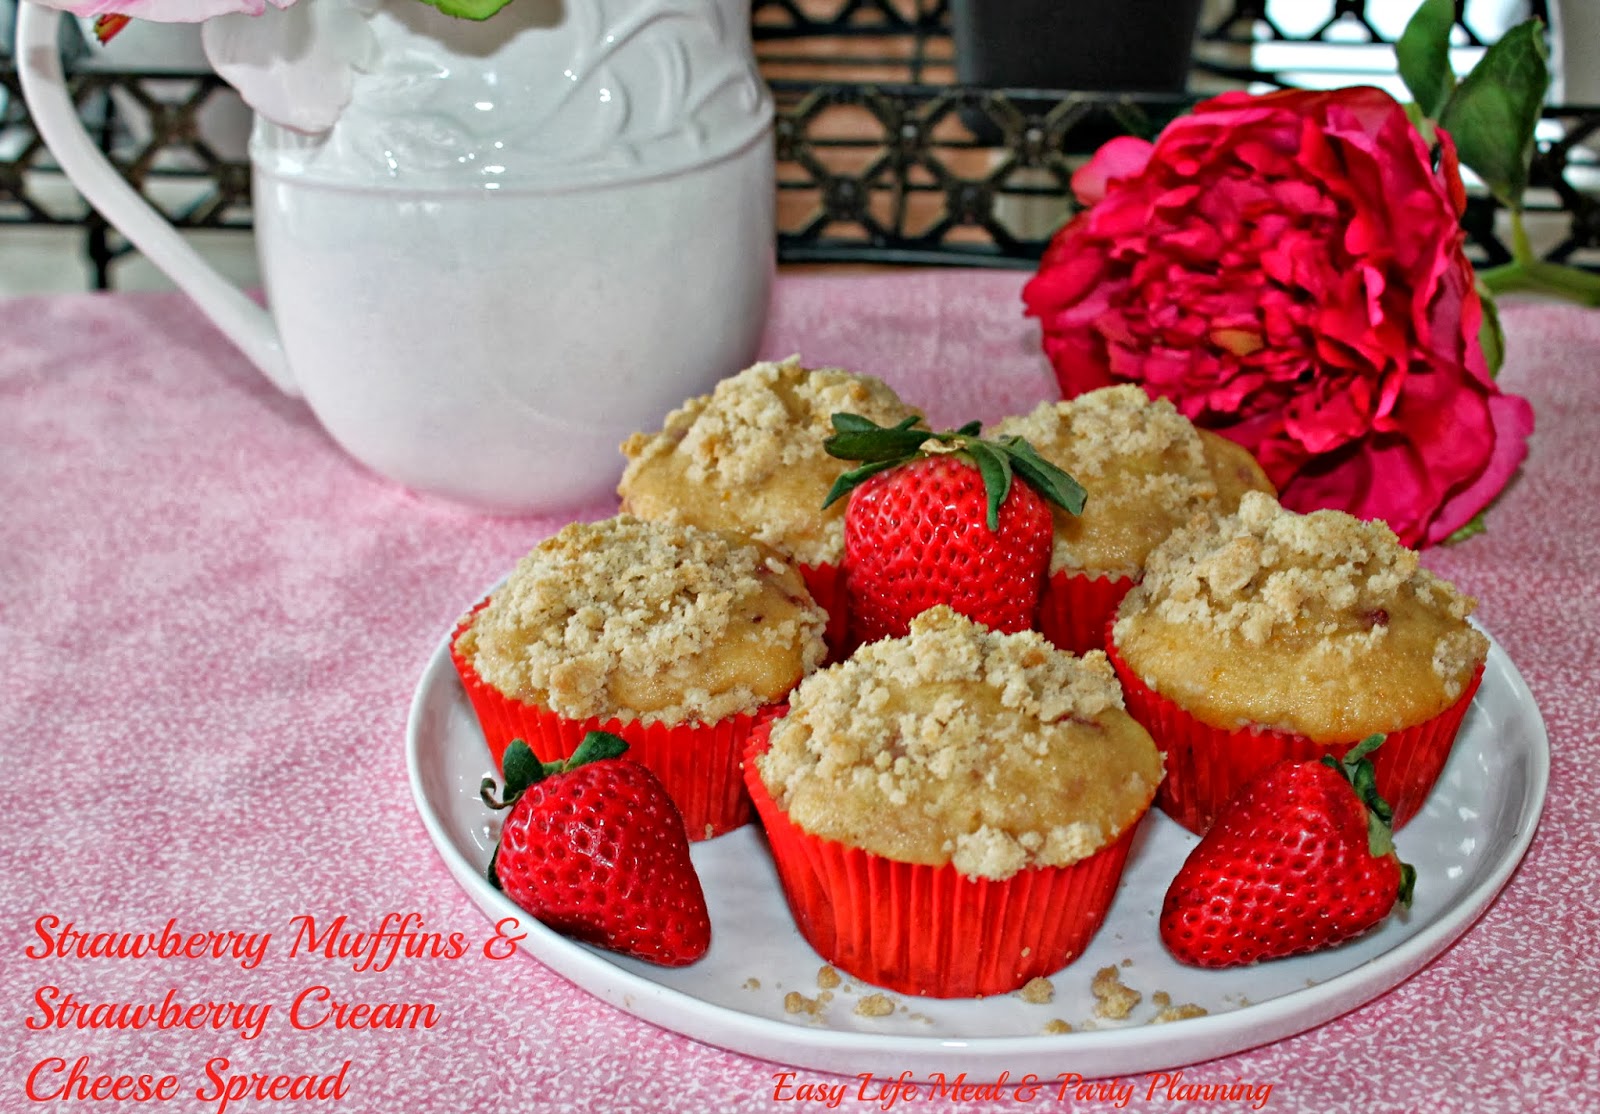 Strawberry Muffins - Easy Life Meal & Party Planning - Delicious served warm with homemade strawberry cream cheese spread